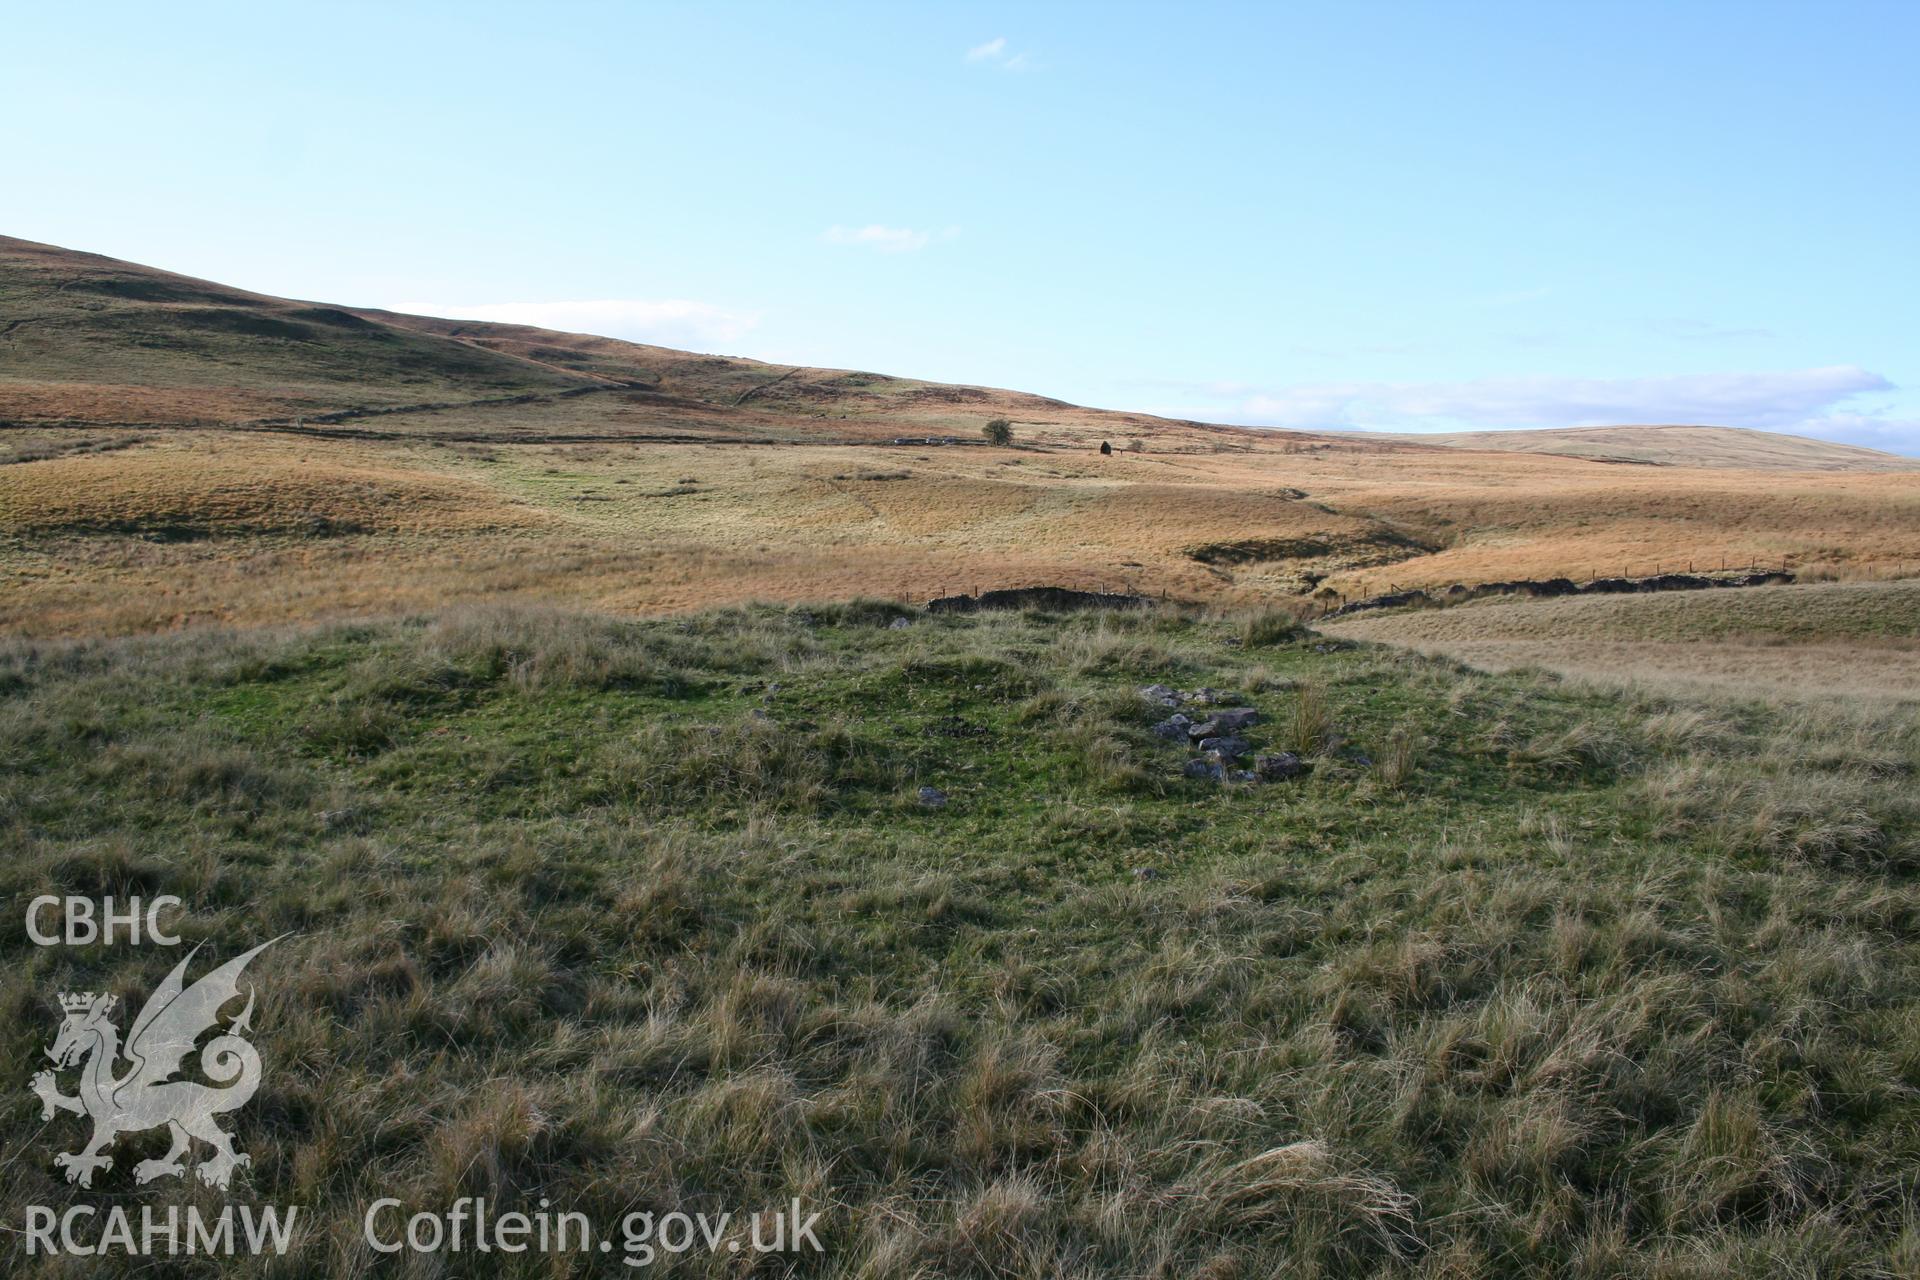 Cairn viewed from the south-east; Maen Llia (NPRN 84541) in the distance, below horizon.